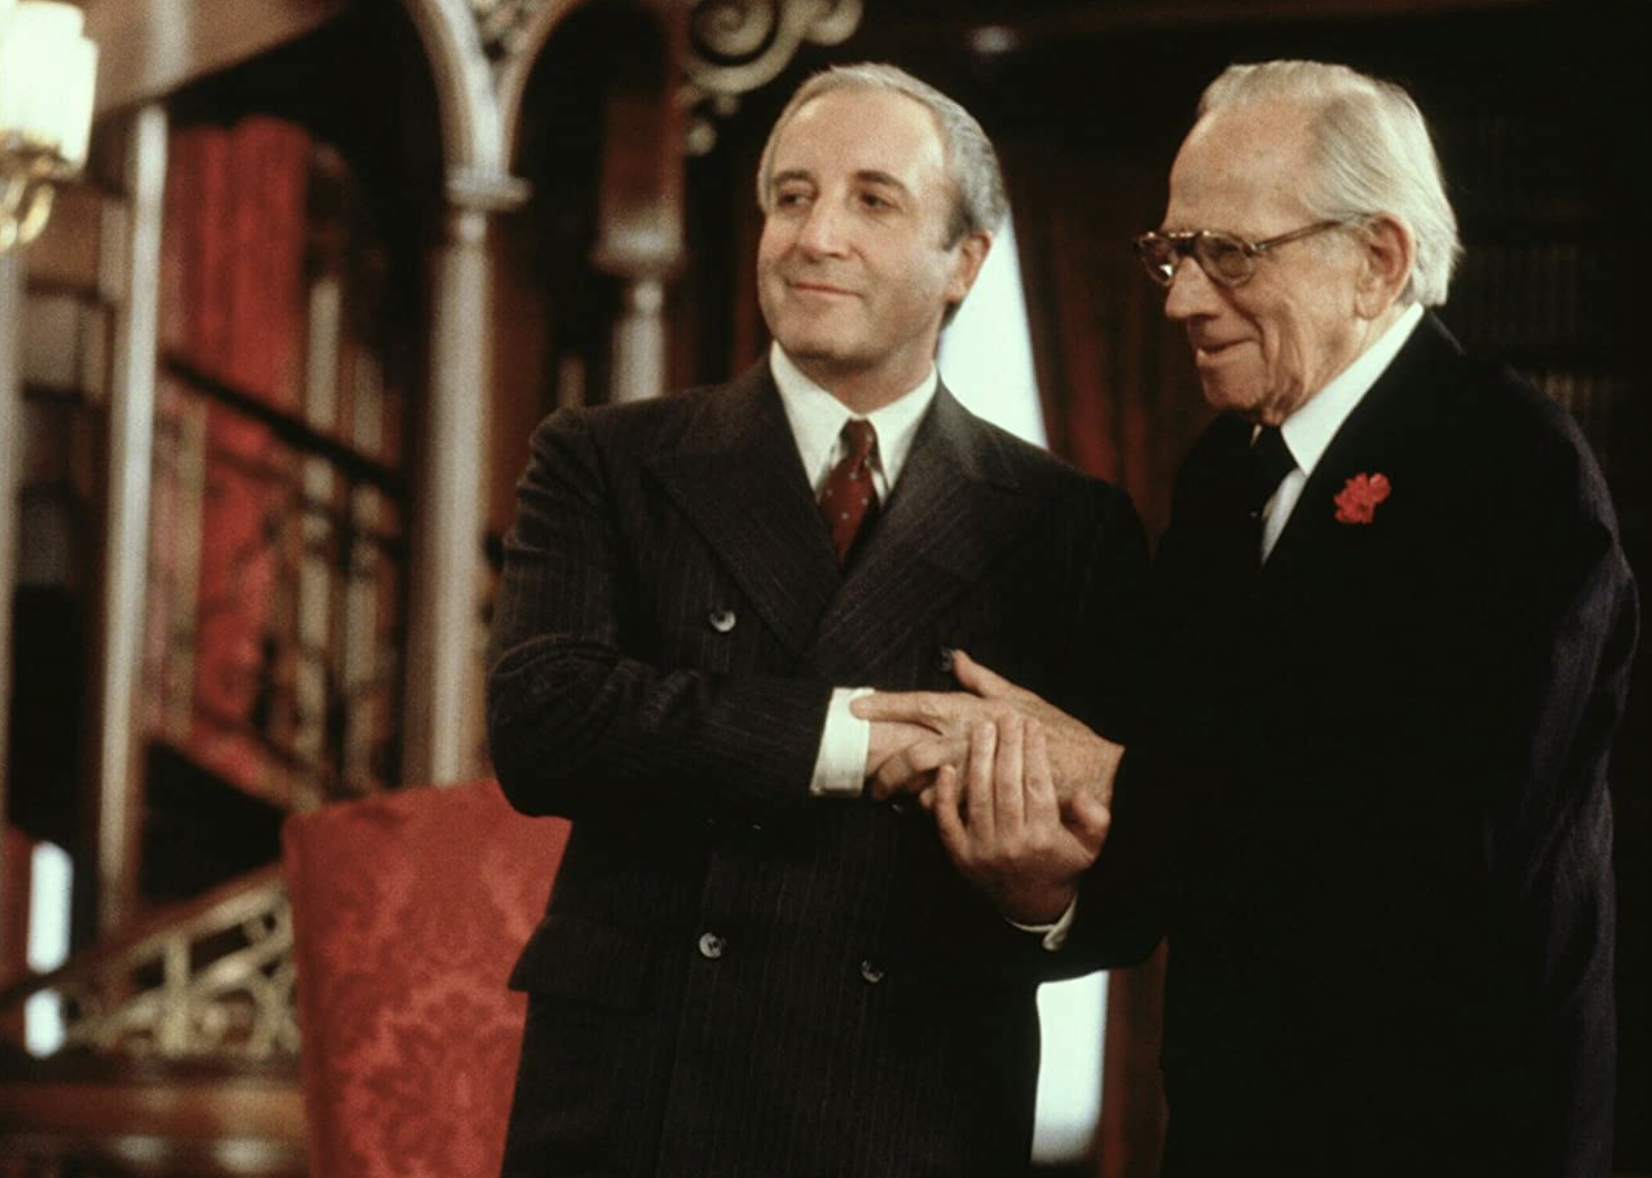 Peter Sellers and Melvyn Douglas in a scene from "Being There".